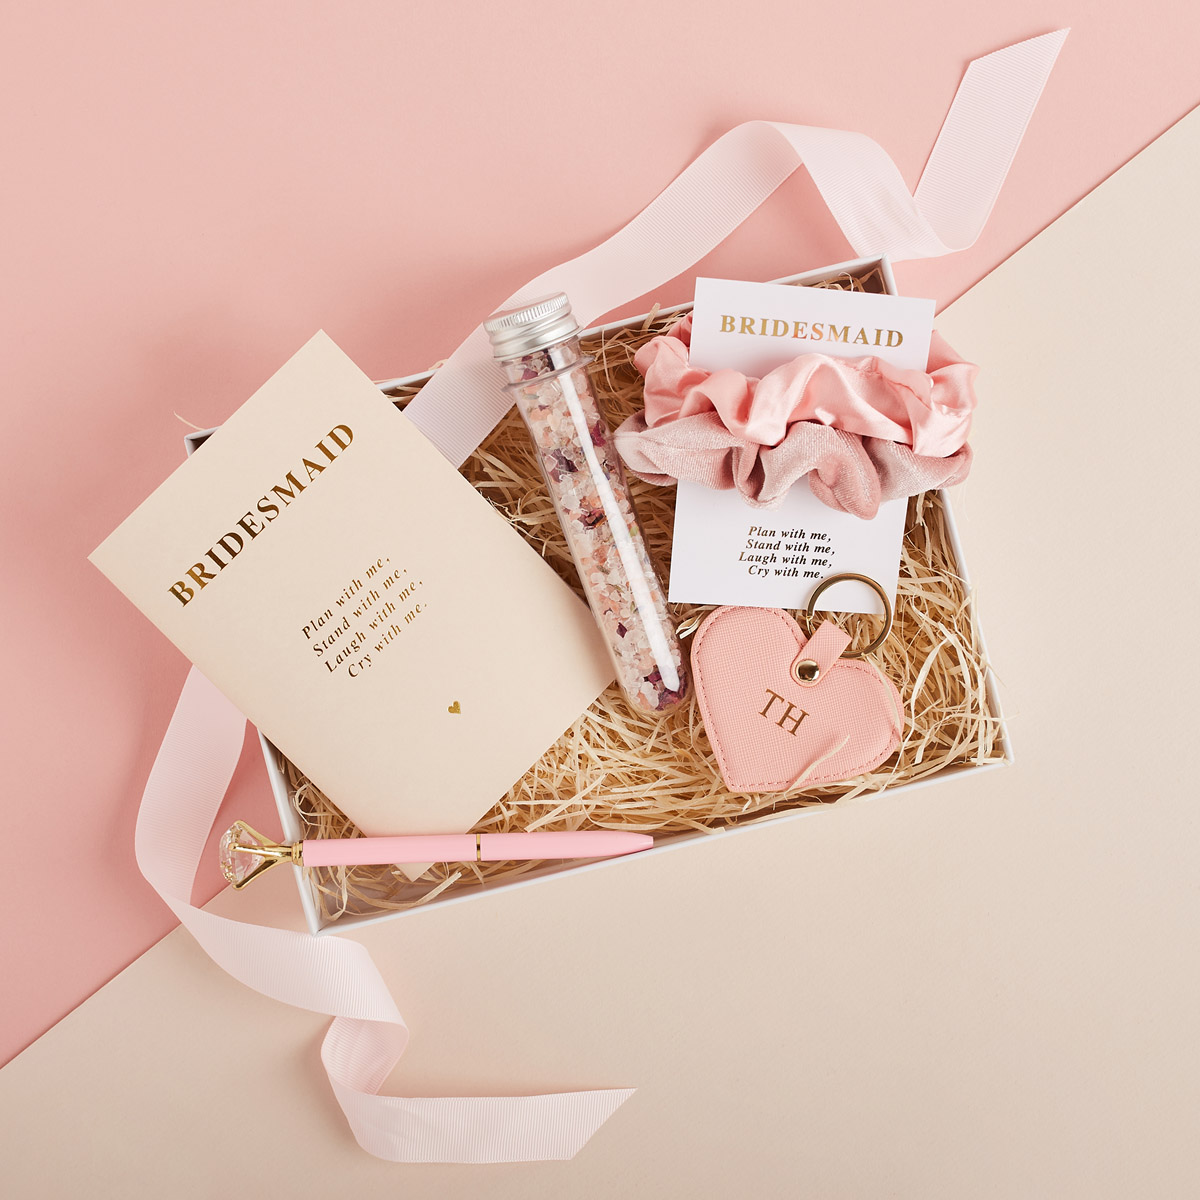 1 Bridesmaids gifts by TEAM HEN